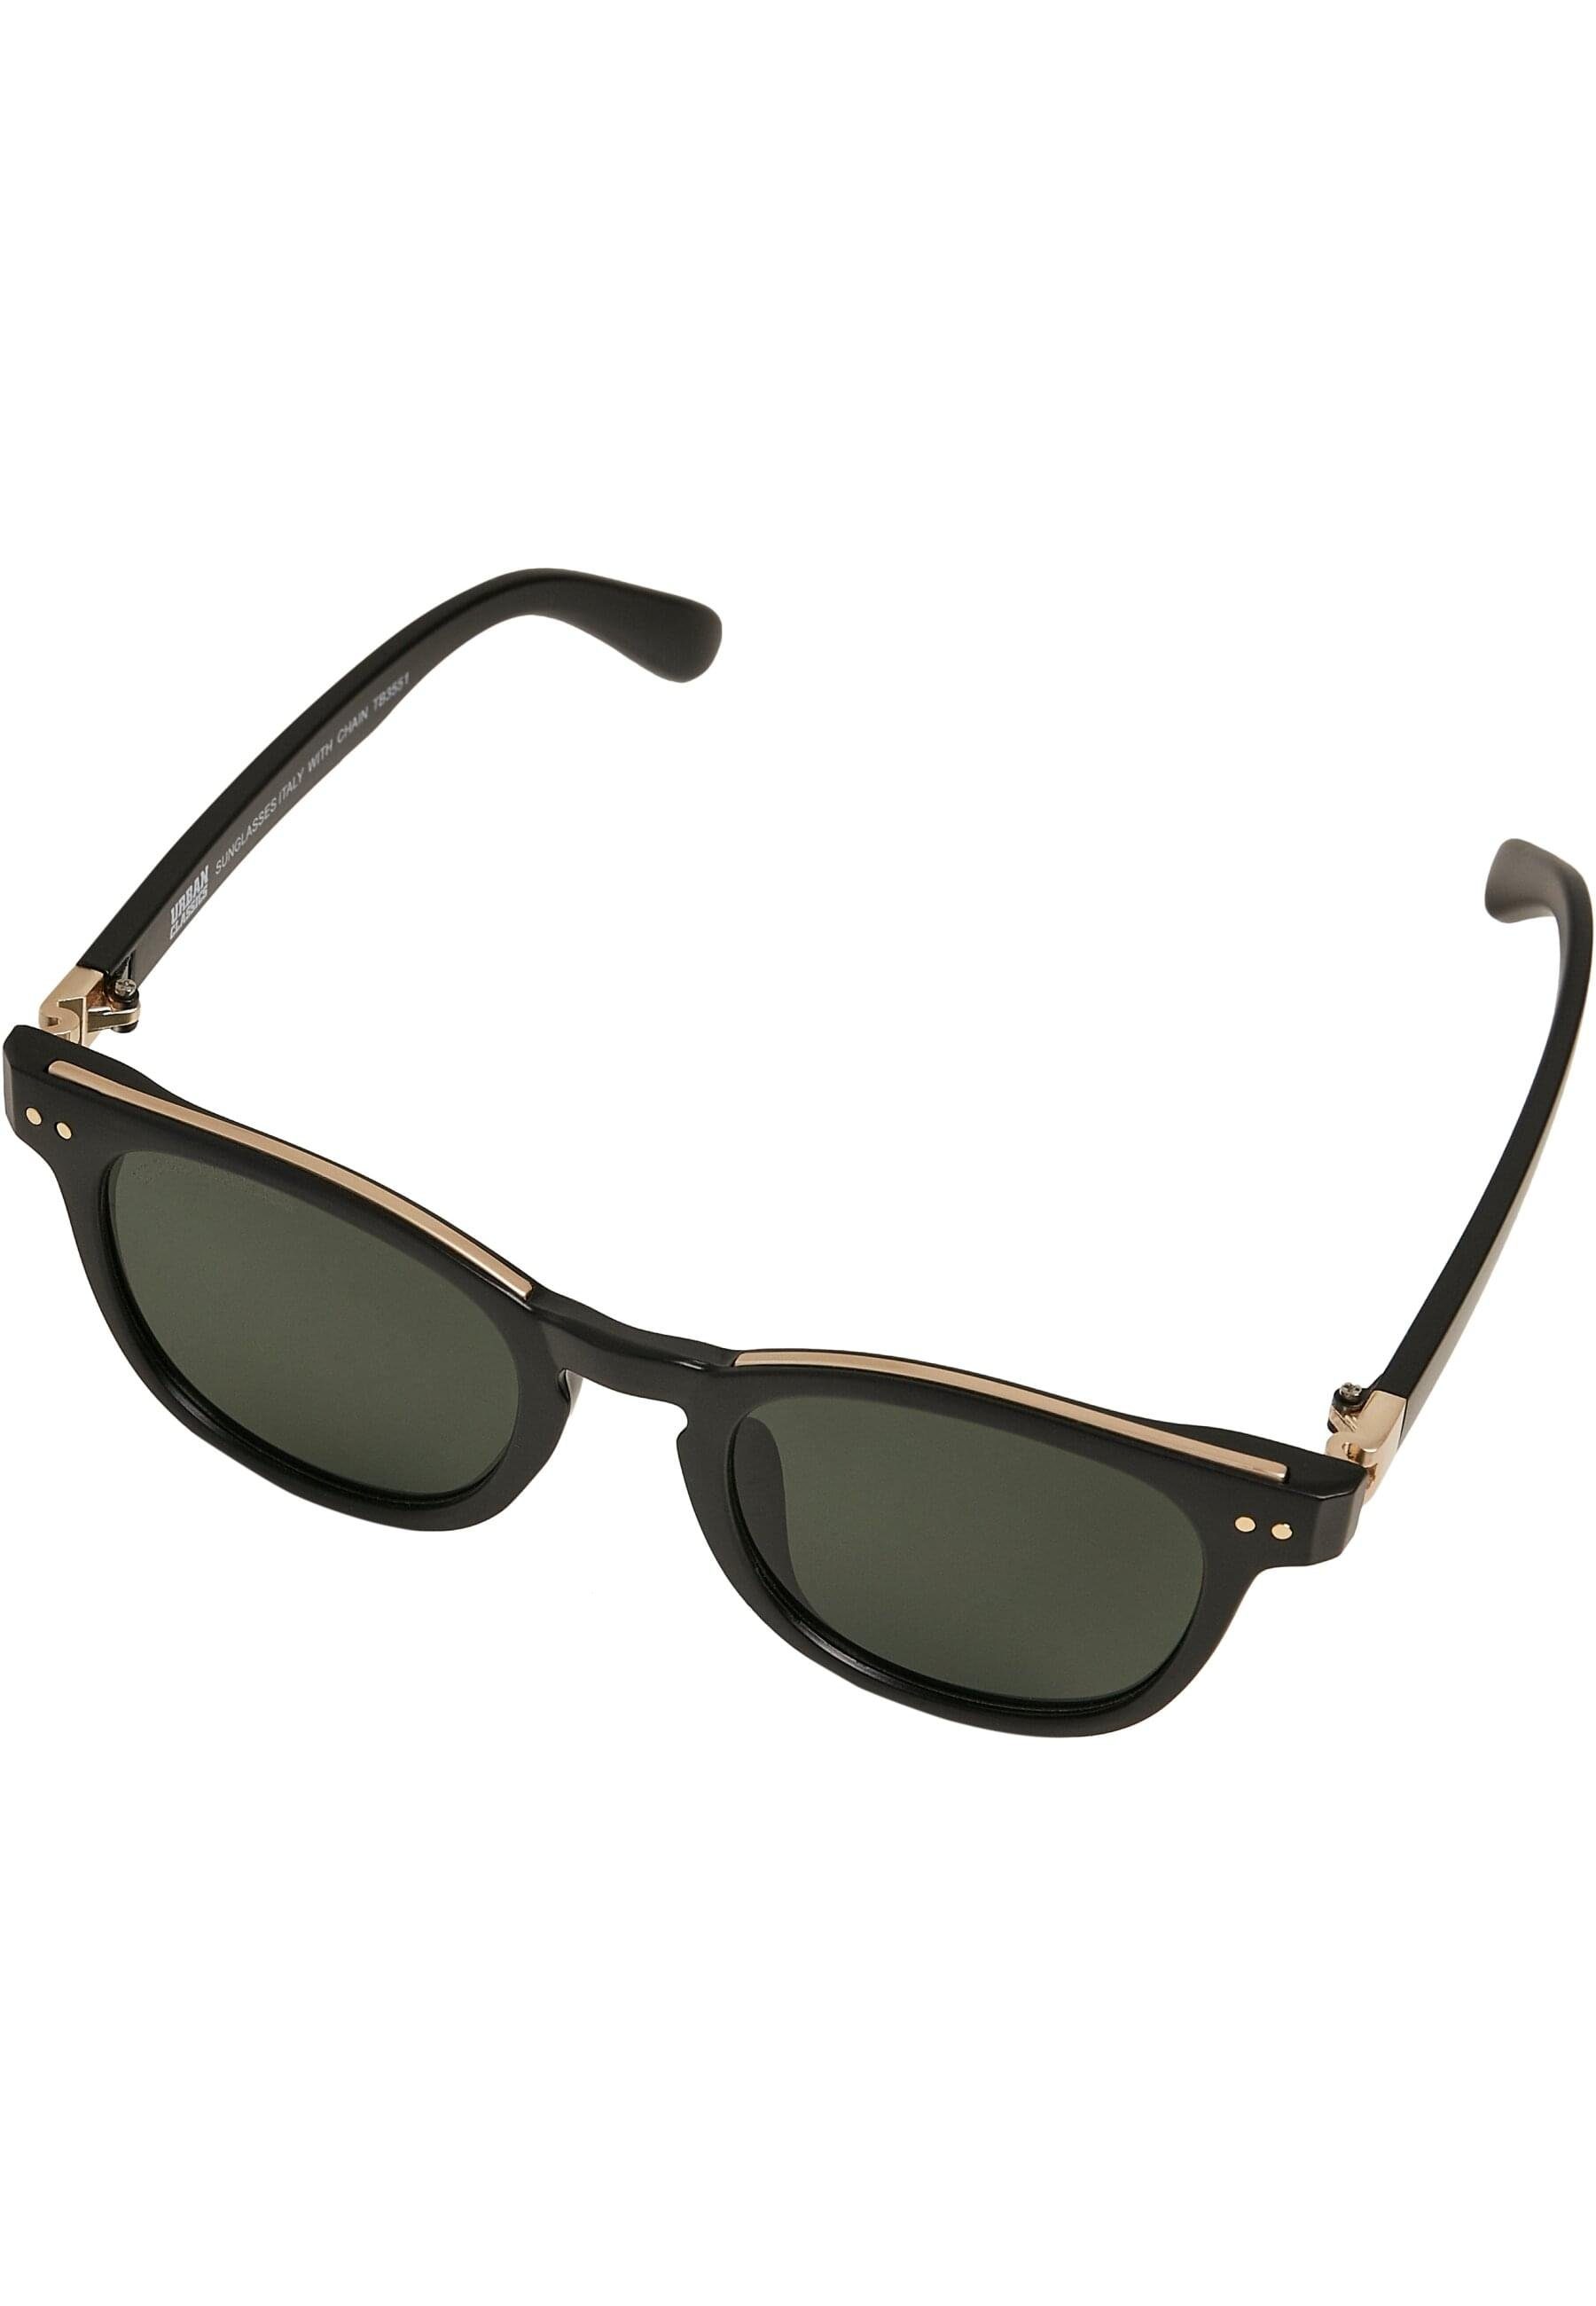 URBAN CLASSICS Sonnenbrille chain Unisex with Italy black/gold/gold Sunglasses